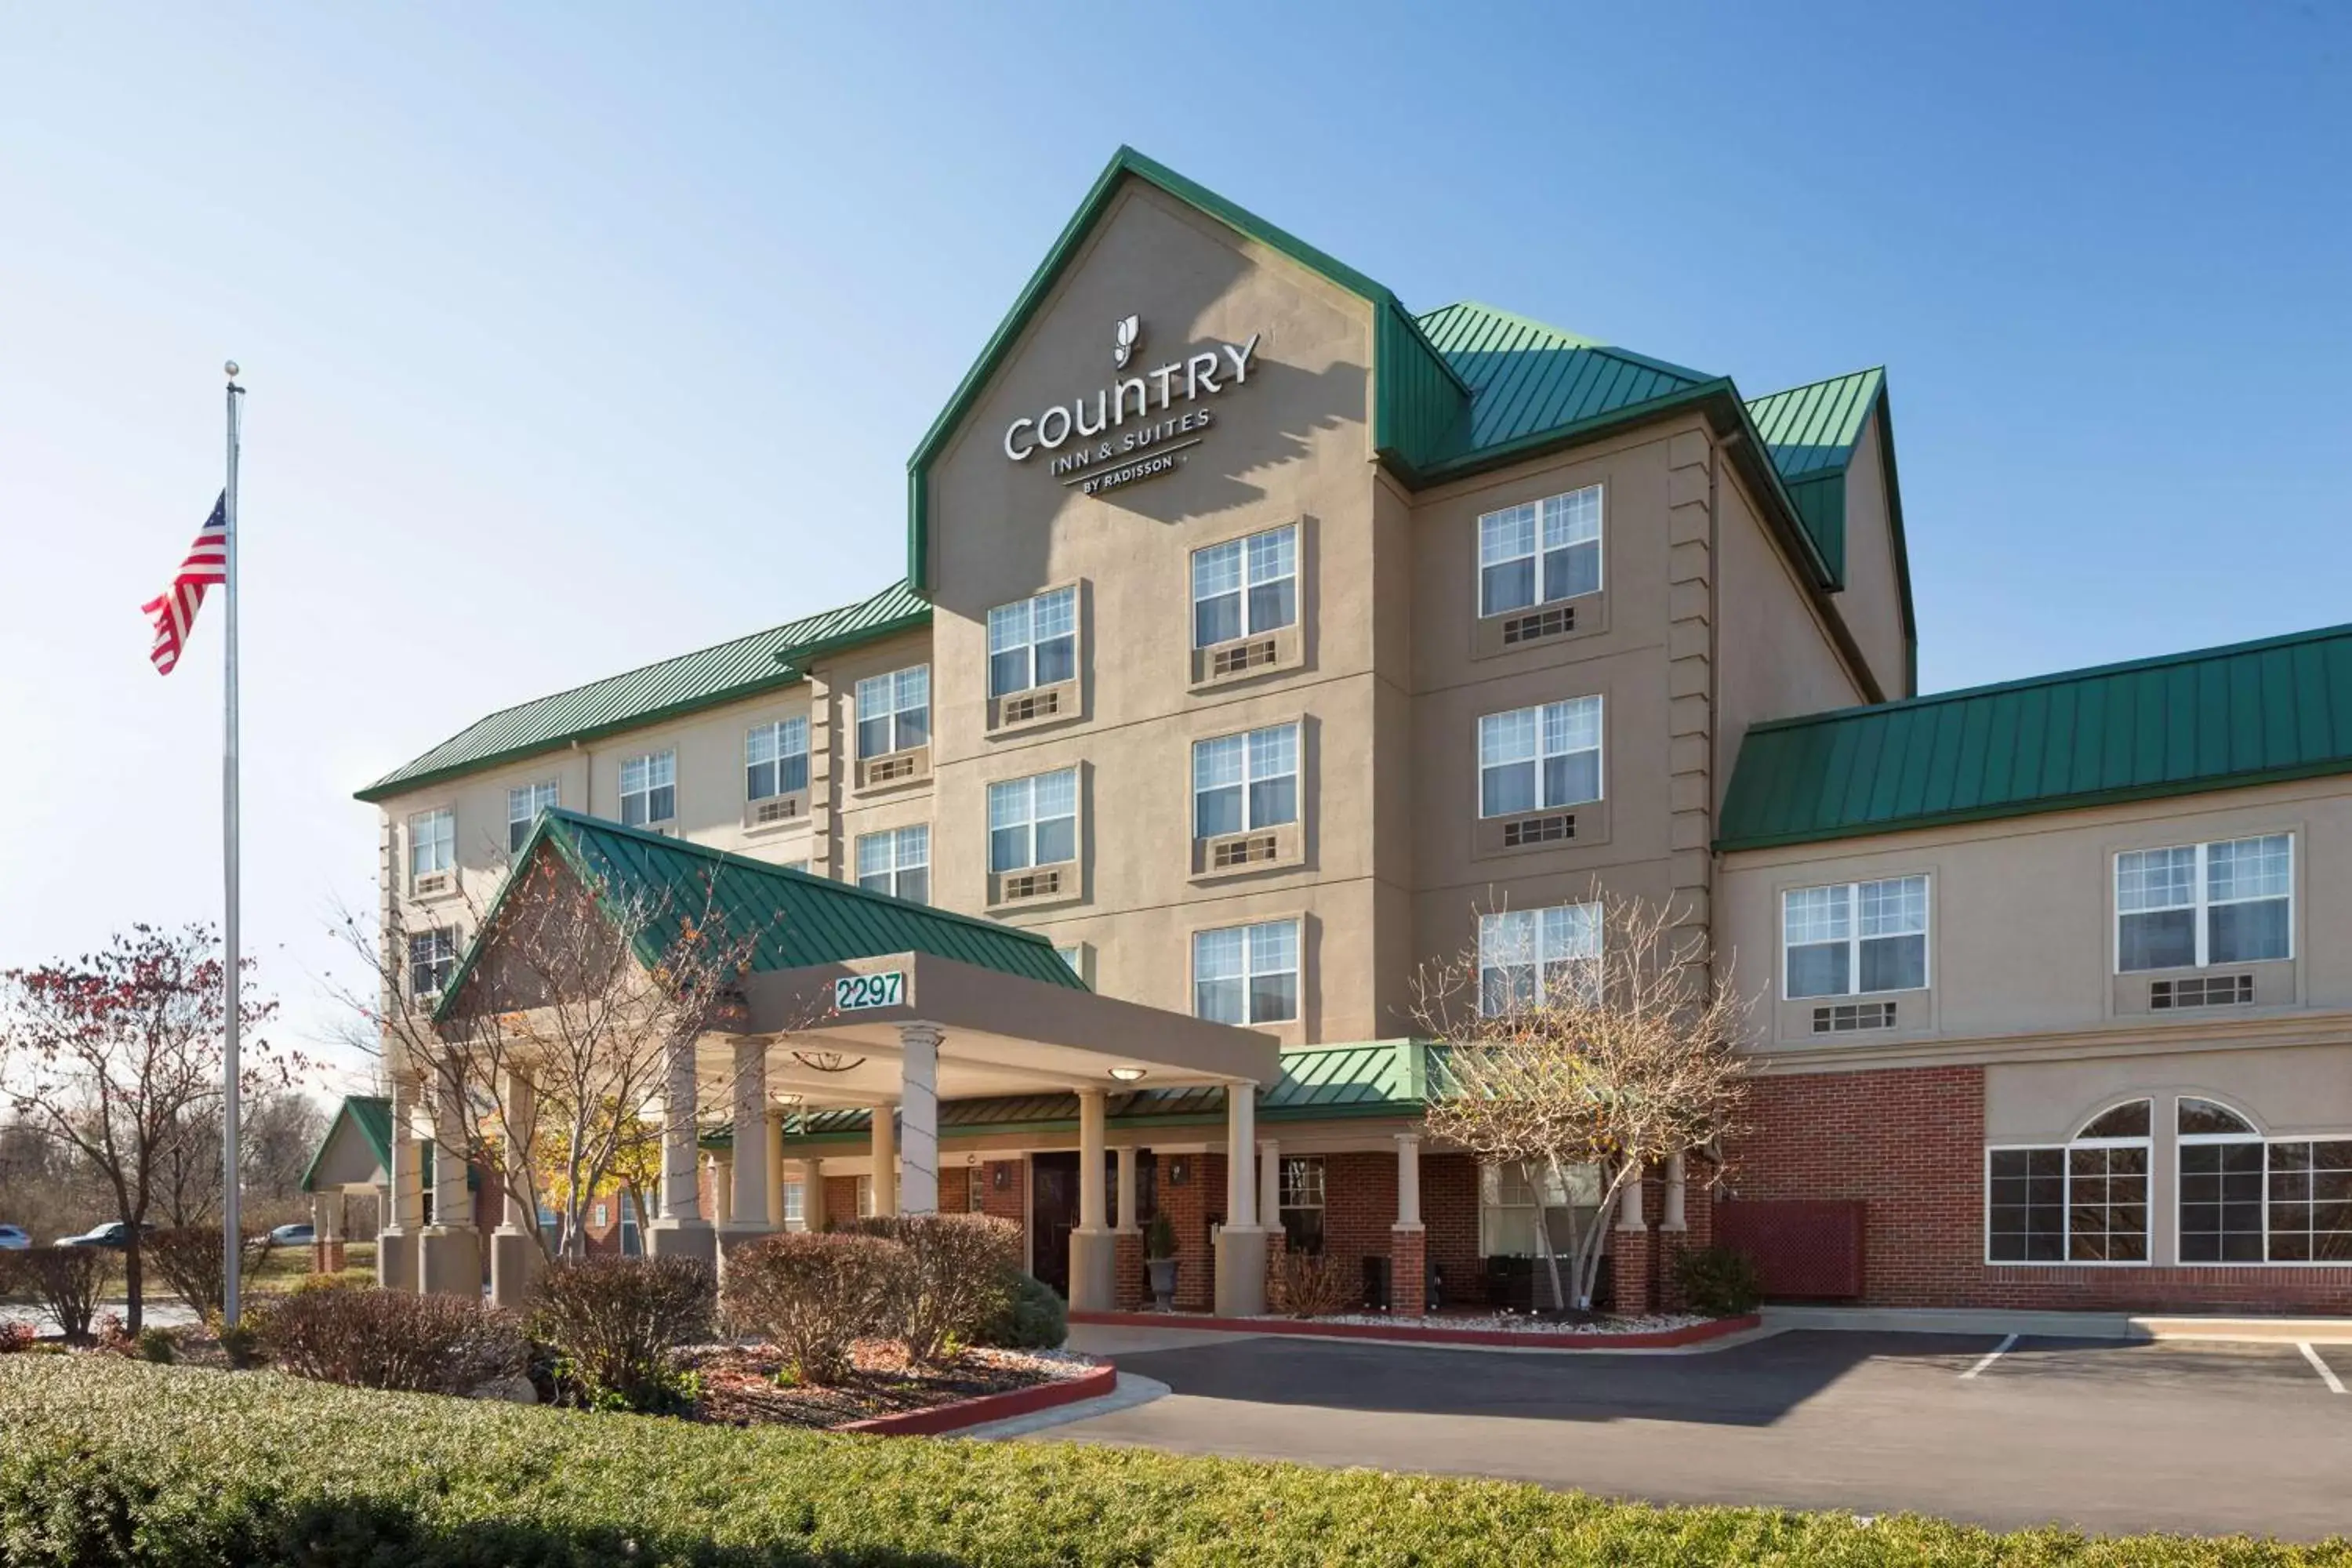 Property building in Country Inn & Suites by Radisson, Lexington, KY